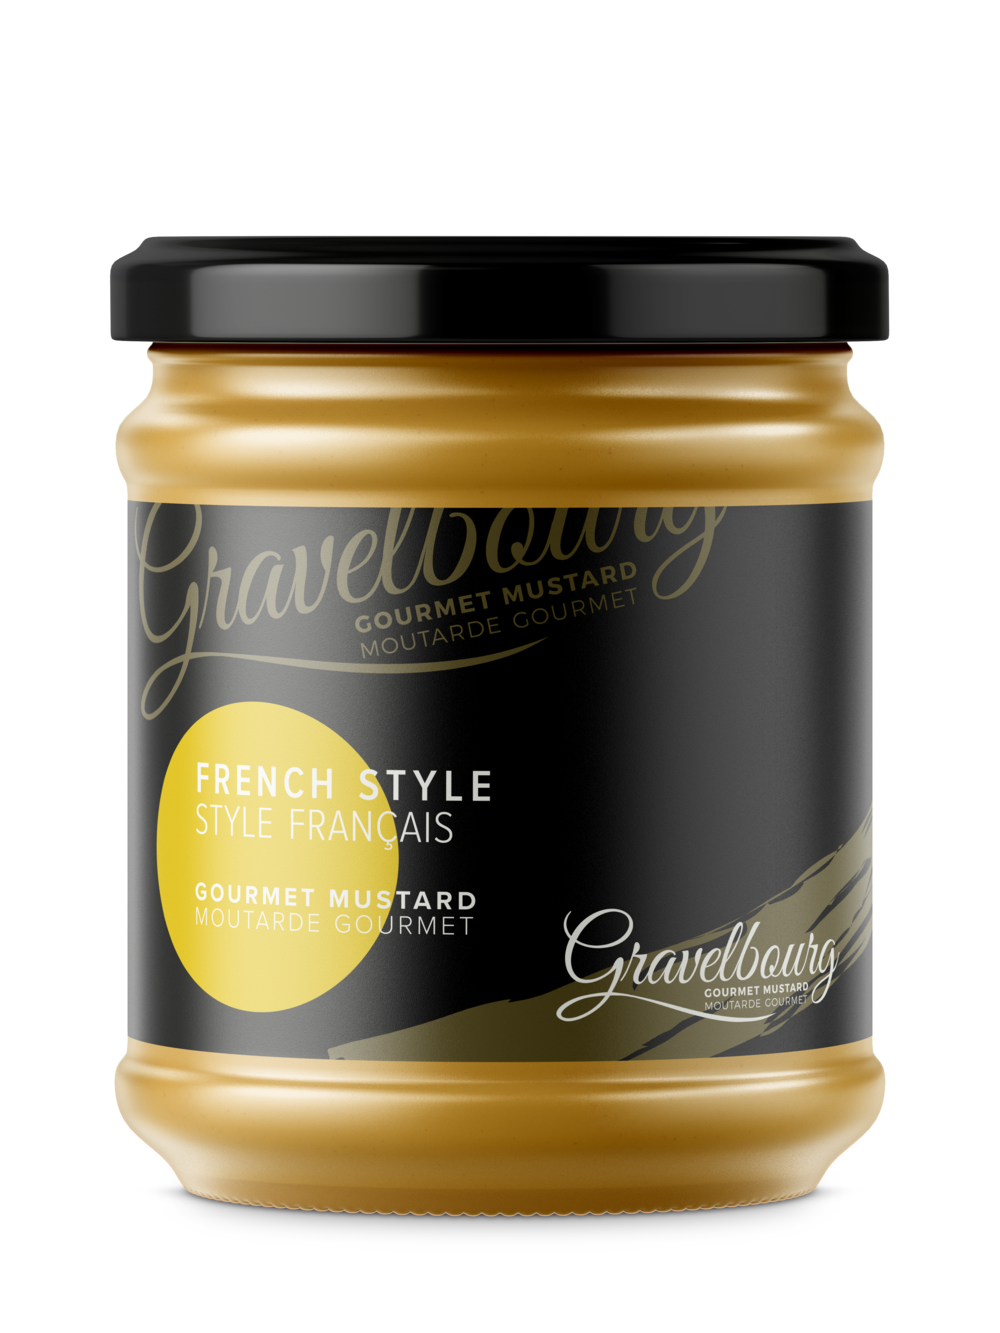 Gravelbourg Gourmet Mustard - French Style